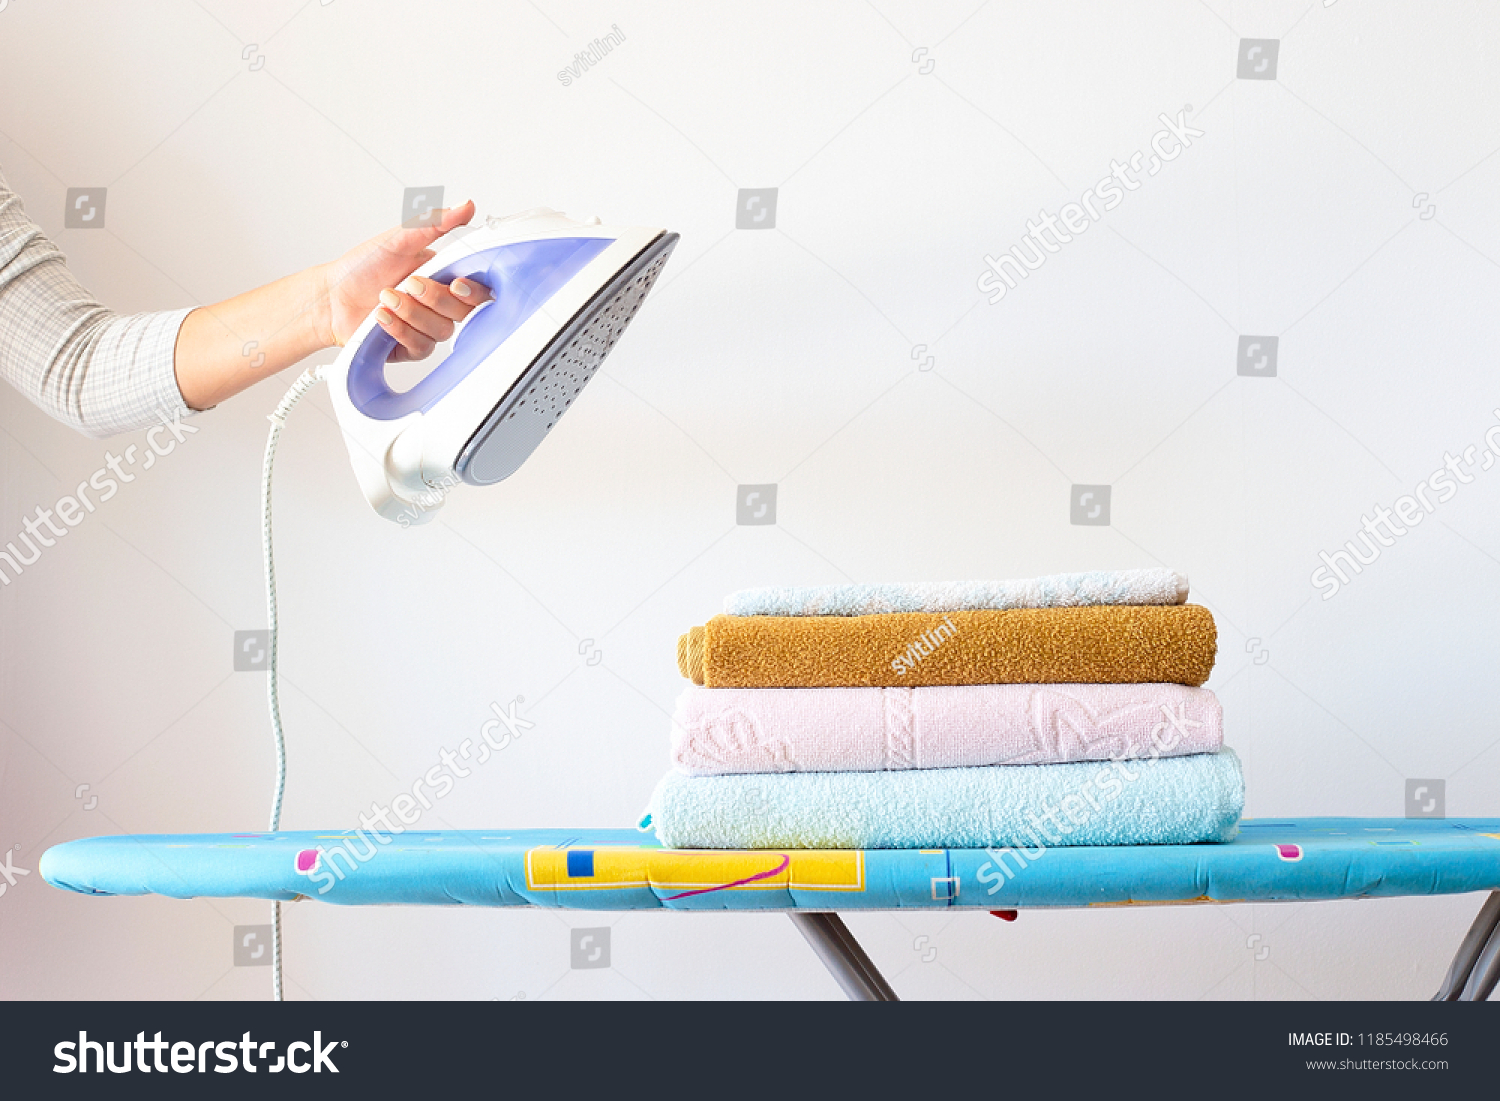 A woman's hand holds an iron over a pile of clean ironed towels on the ironing board. Homework Concept #1185498466